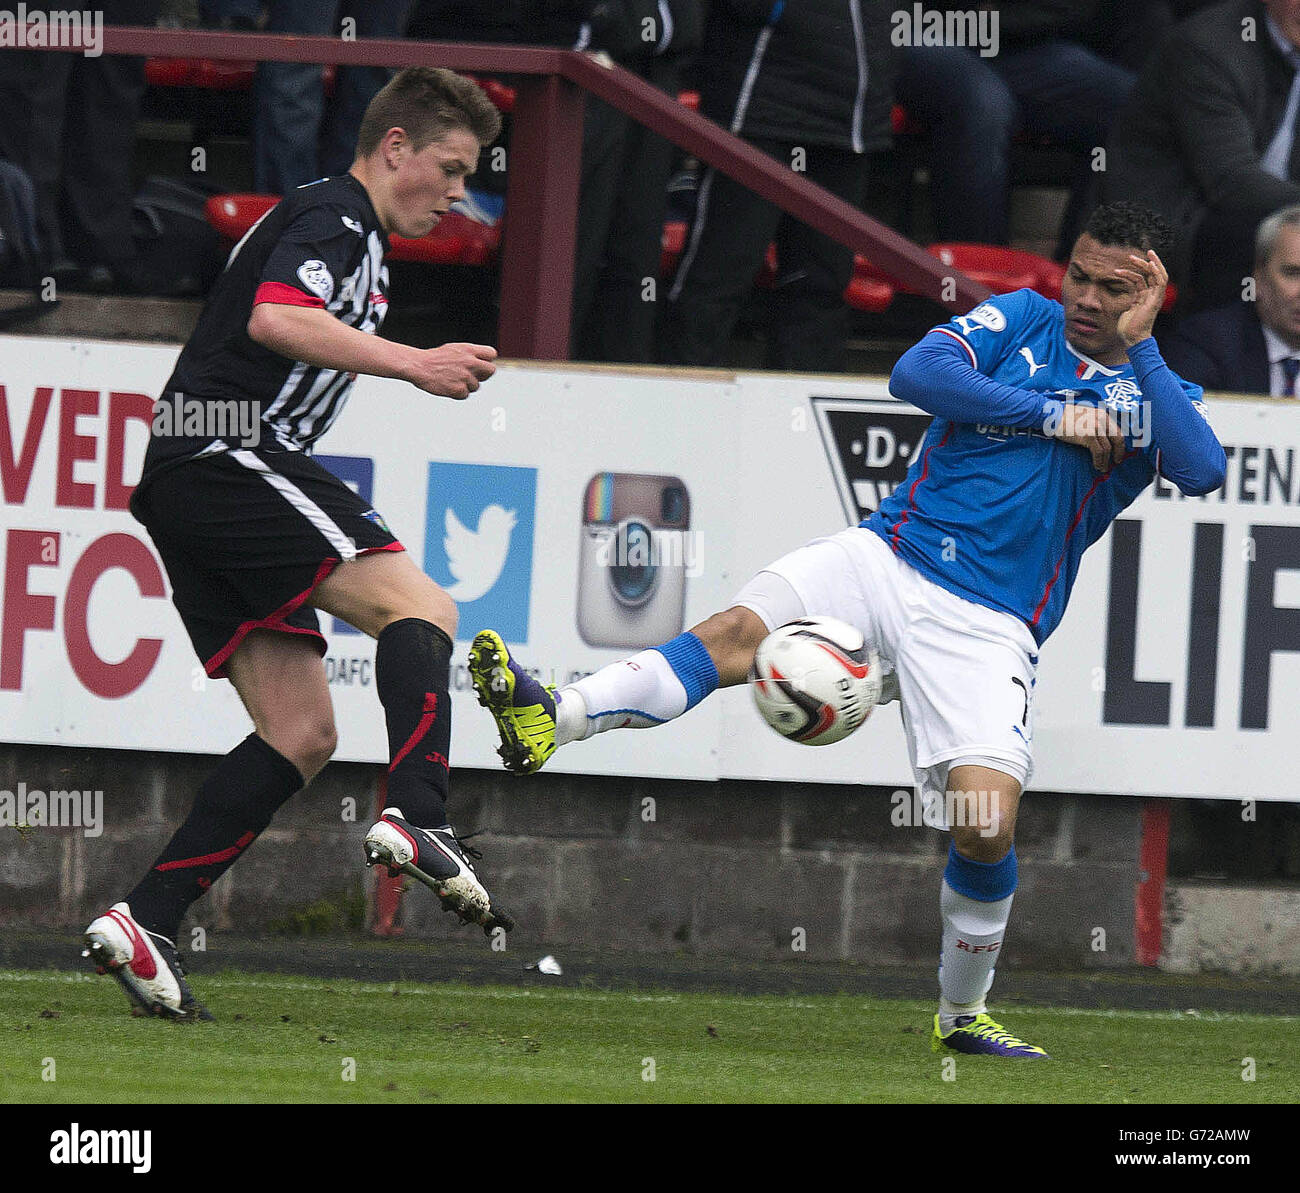 Dunfermline's Lewis Spence (left) and Rangers' Arnold Peralta (right) during the Scottish League One match at East End Park, Dunfermline. Stock Photo